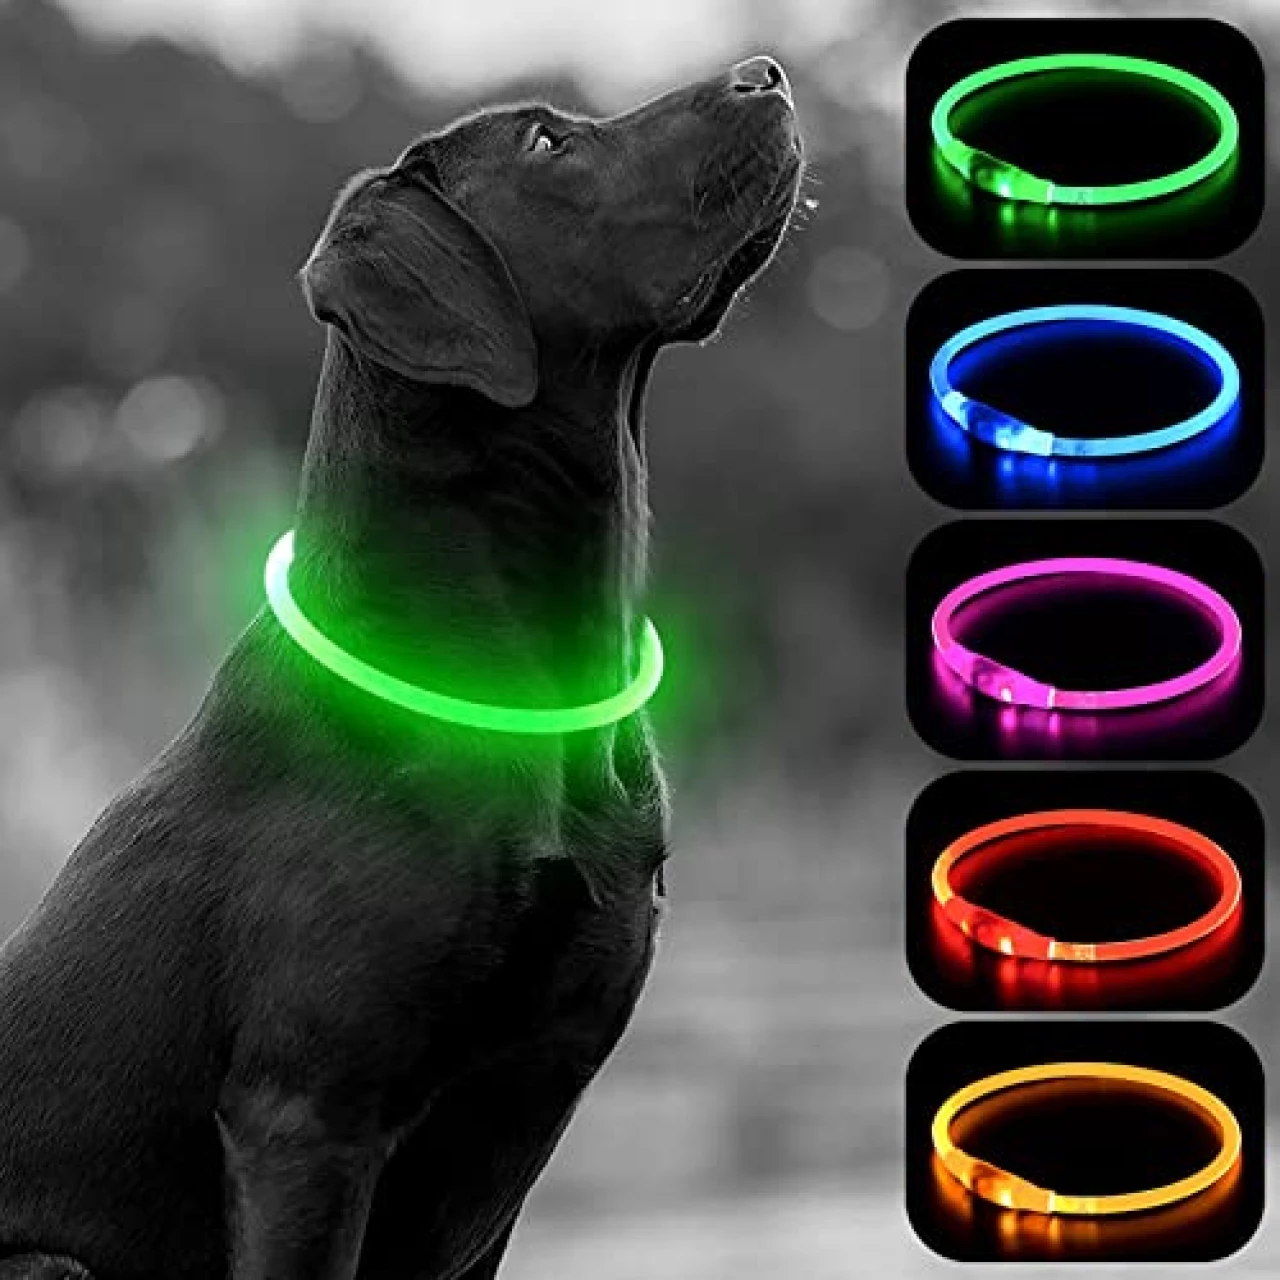 HIGO LED Dog Collar - USB Rechargeable Light Up Dog Collars Glow in The Dark - Waterproof LED Dog Necklace Light for Night Walking (Green)